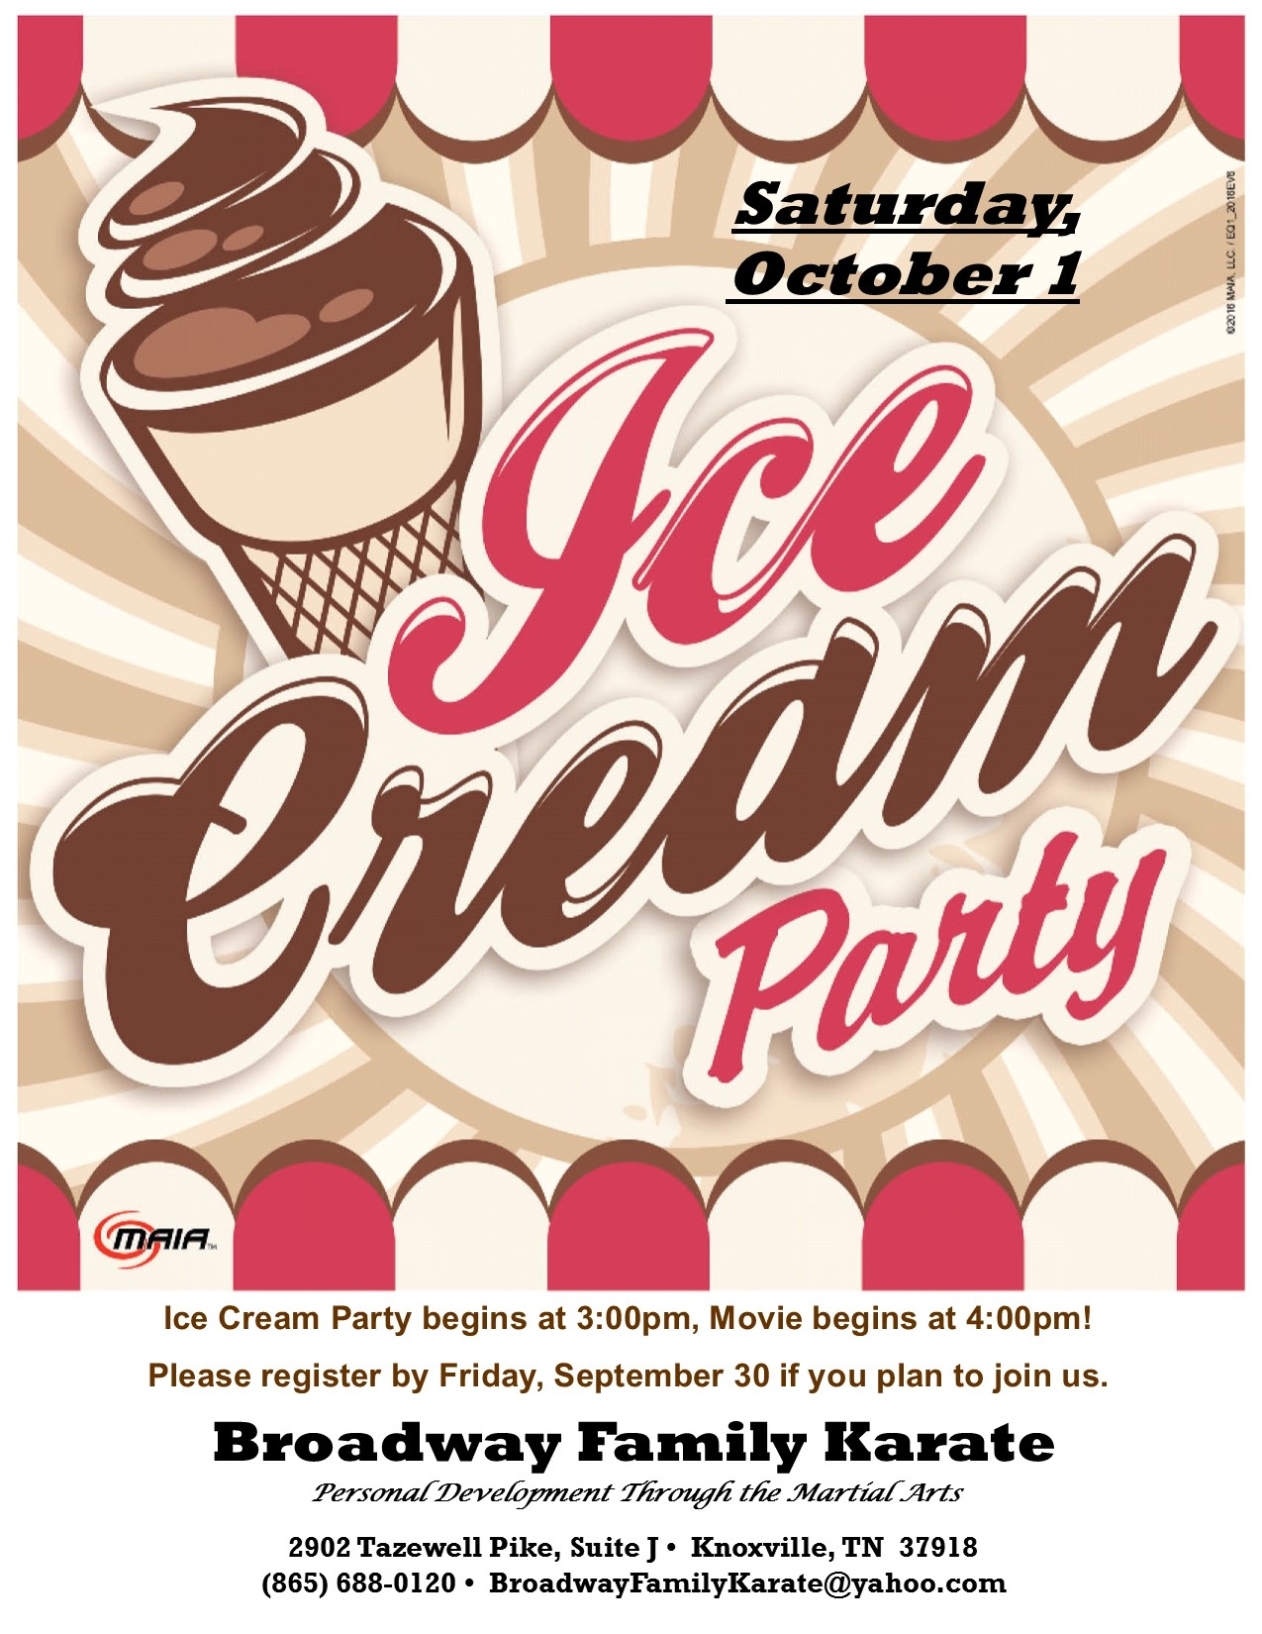 End Of Summer Ice Cream Party And Movie Afternoon  Broadway Family Karate With Ice Cream Party Flyer Template